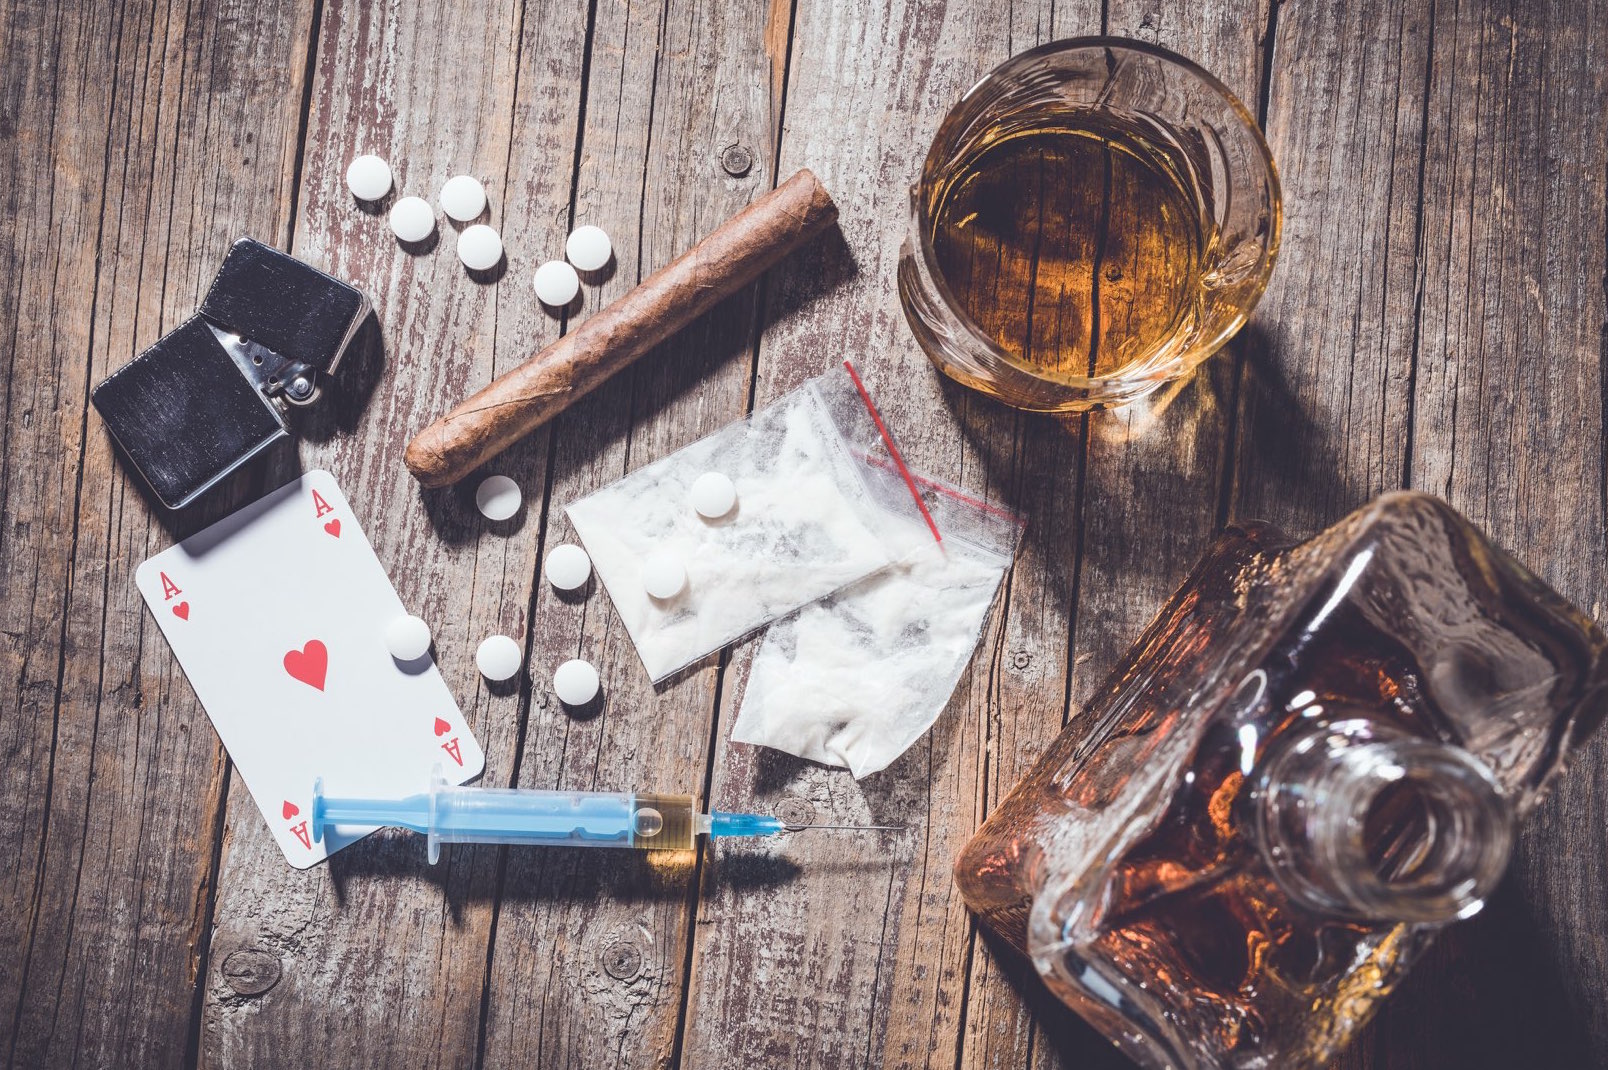 Alcohol, drugs and your dental health